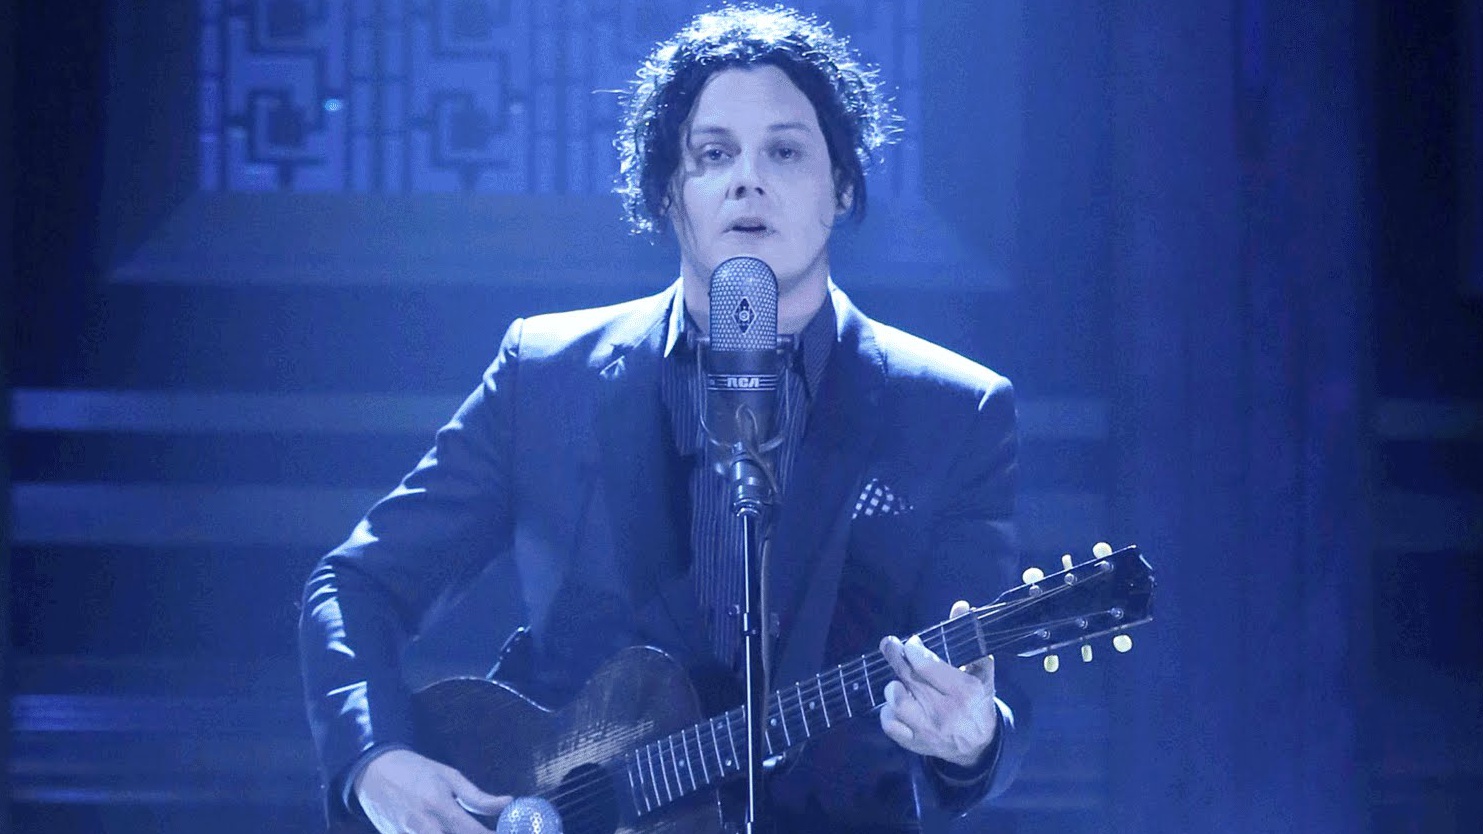 Watch Teary-Eyed Jack White Break His Live Hiatus With Emotional Acoustic Medley On Fallon